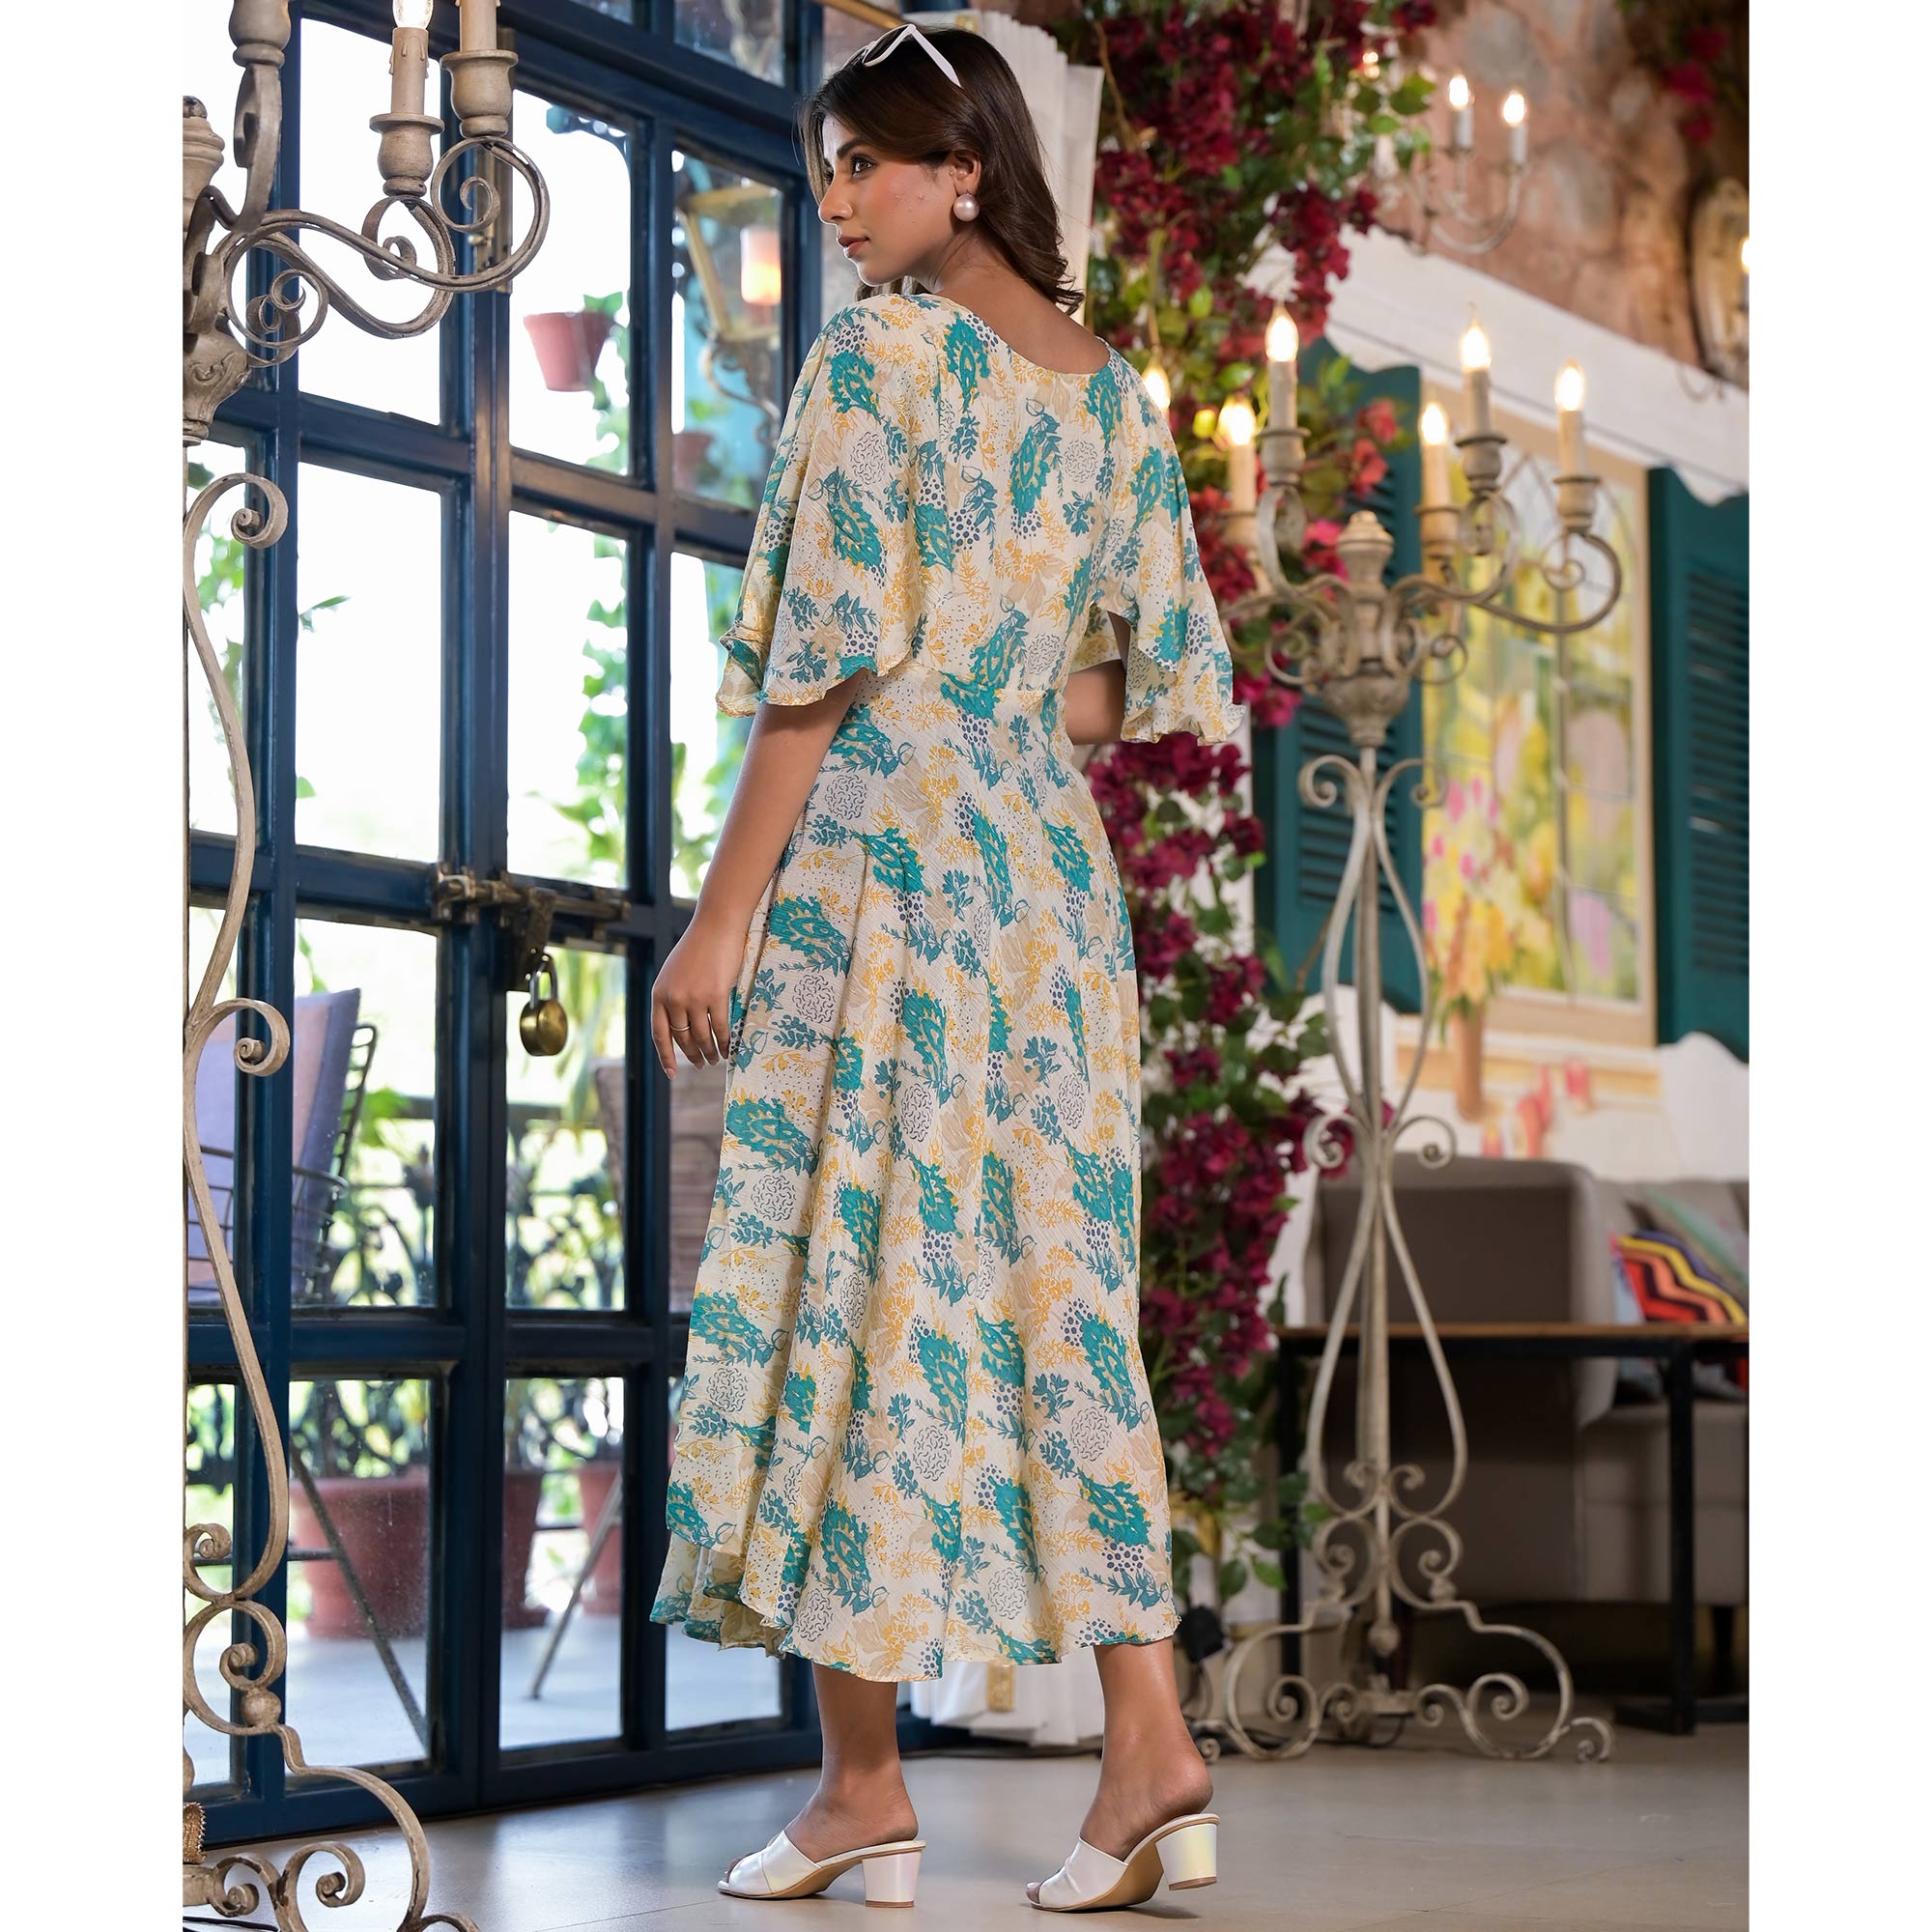 Off White Floral Printed A-Line Chiffon Dress